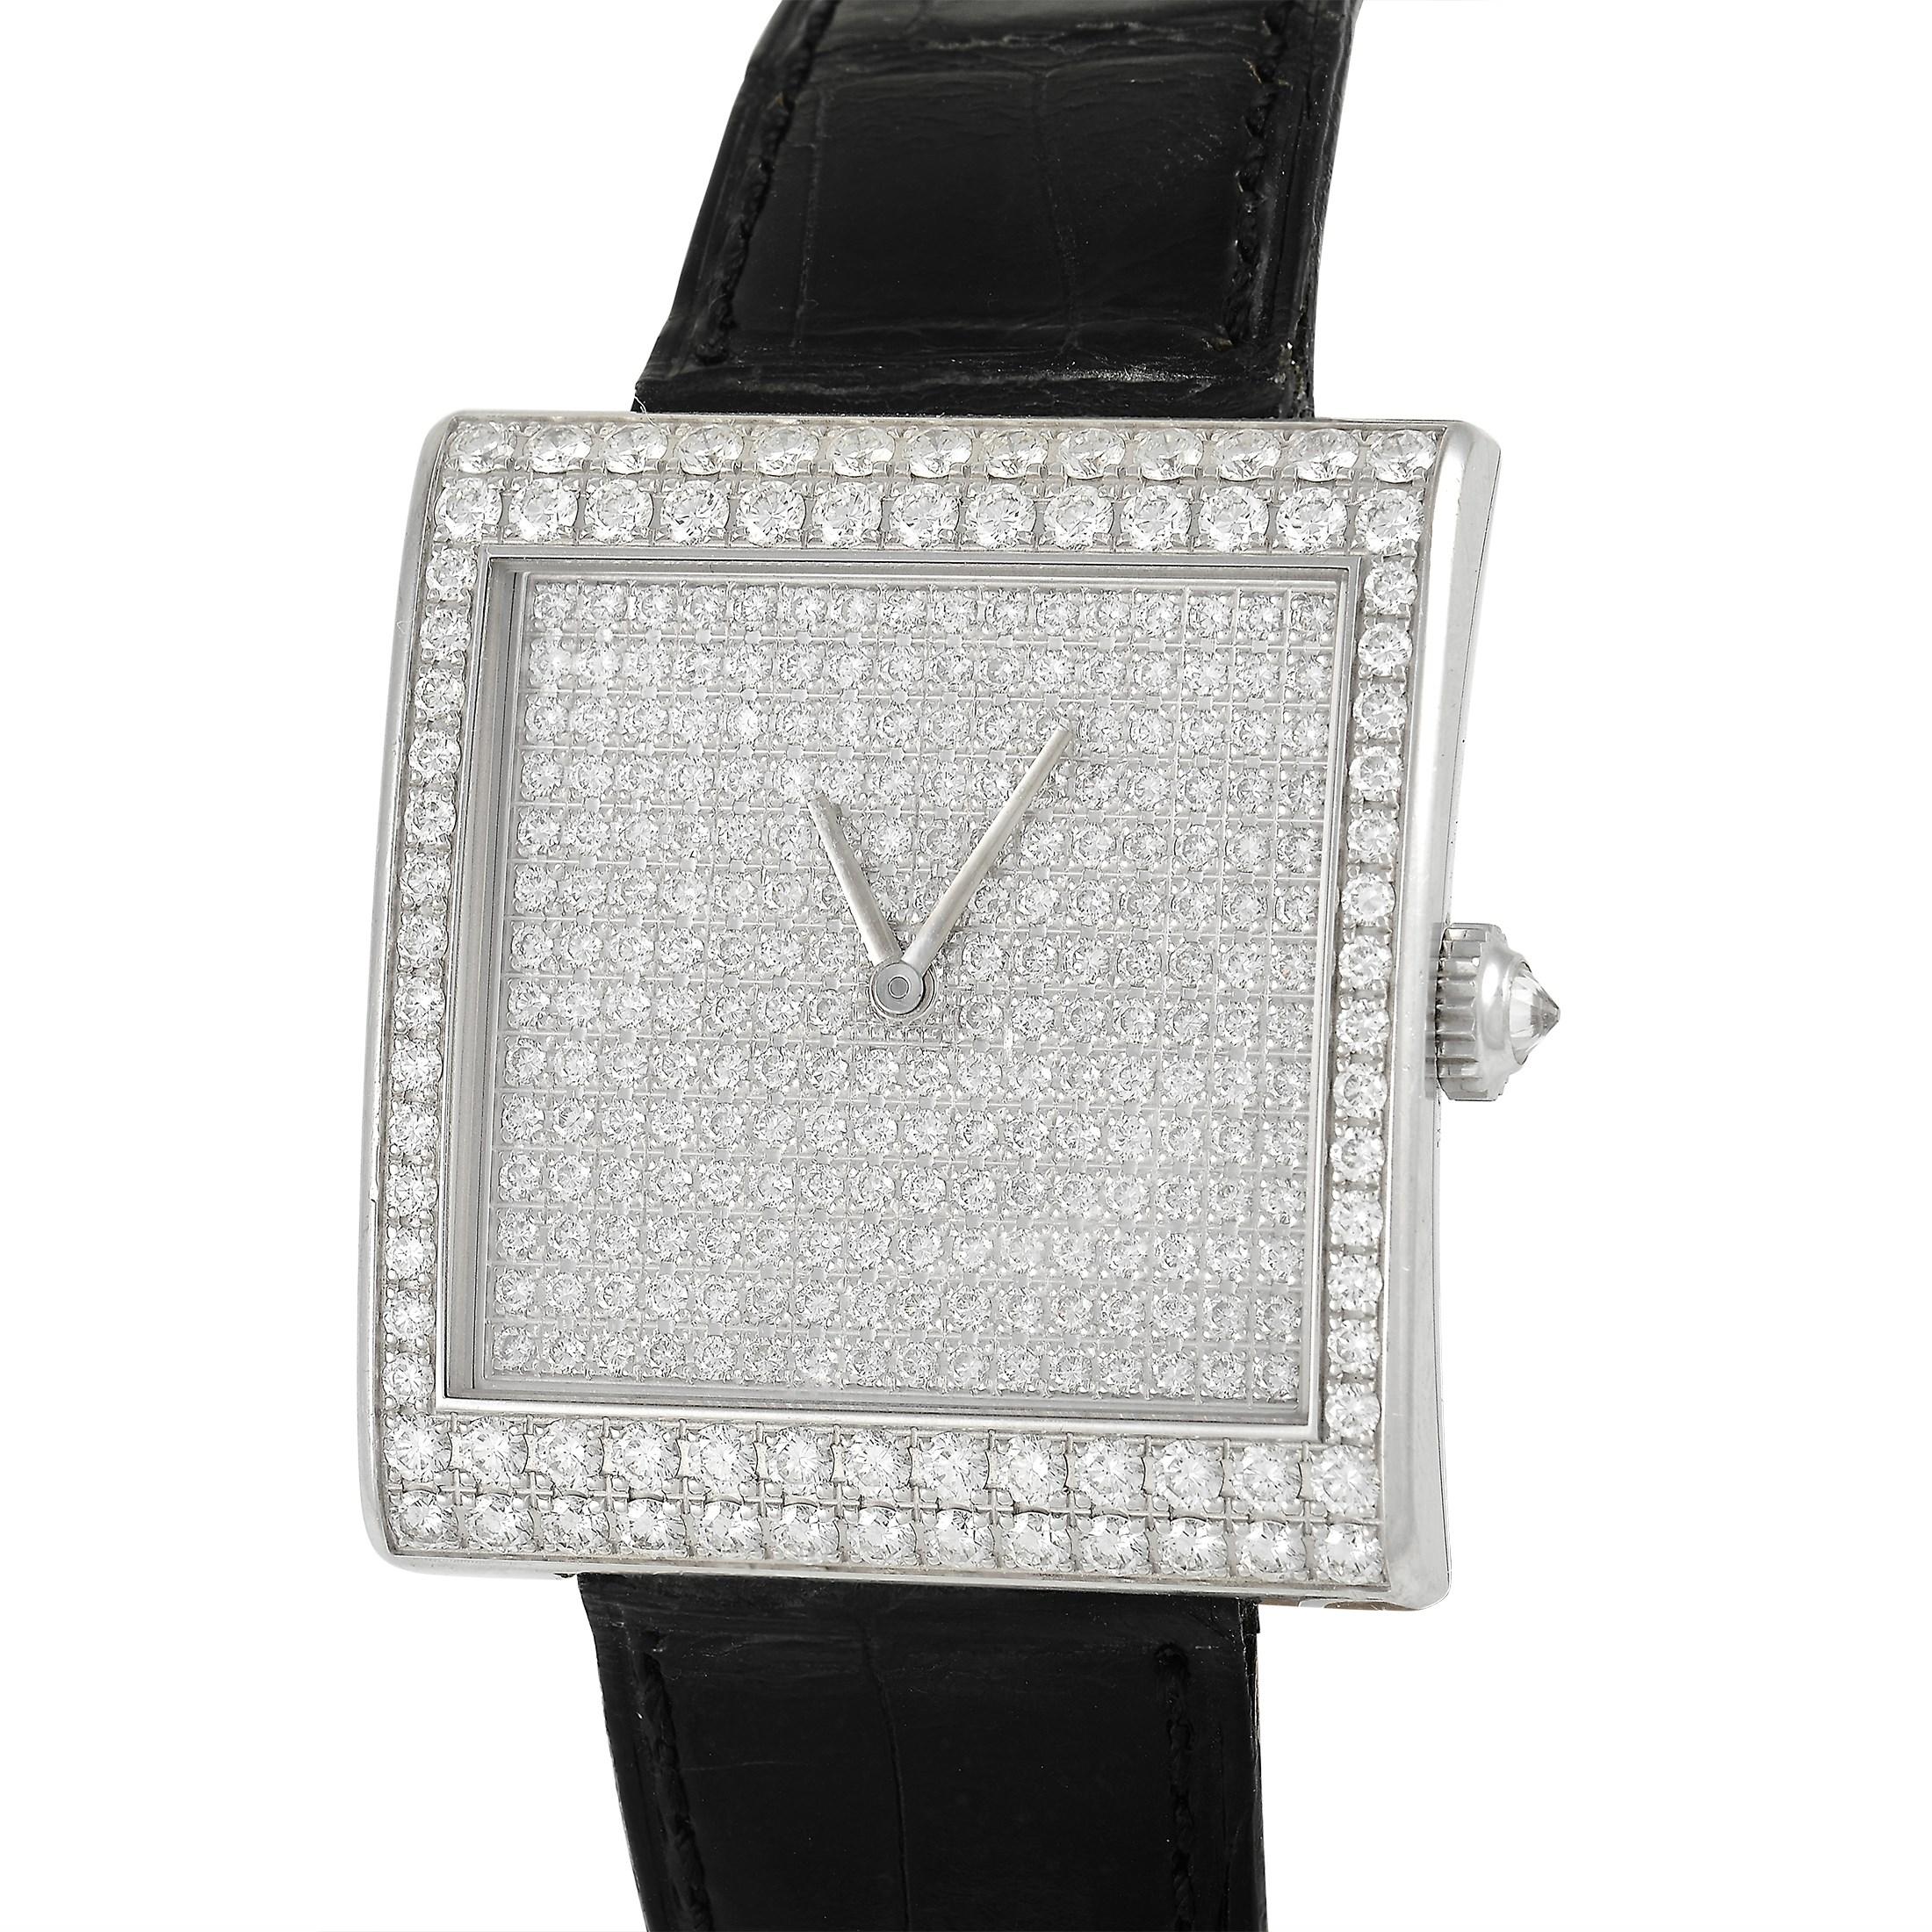 This Corum Buckingham watch, reference number 138.182.69, features an 18K white Gold case that measures 37 x 40mm and is set with round-cut diamonds over the entire face and bezel of the watch. The case is presented on a sleek black leather strap